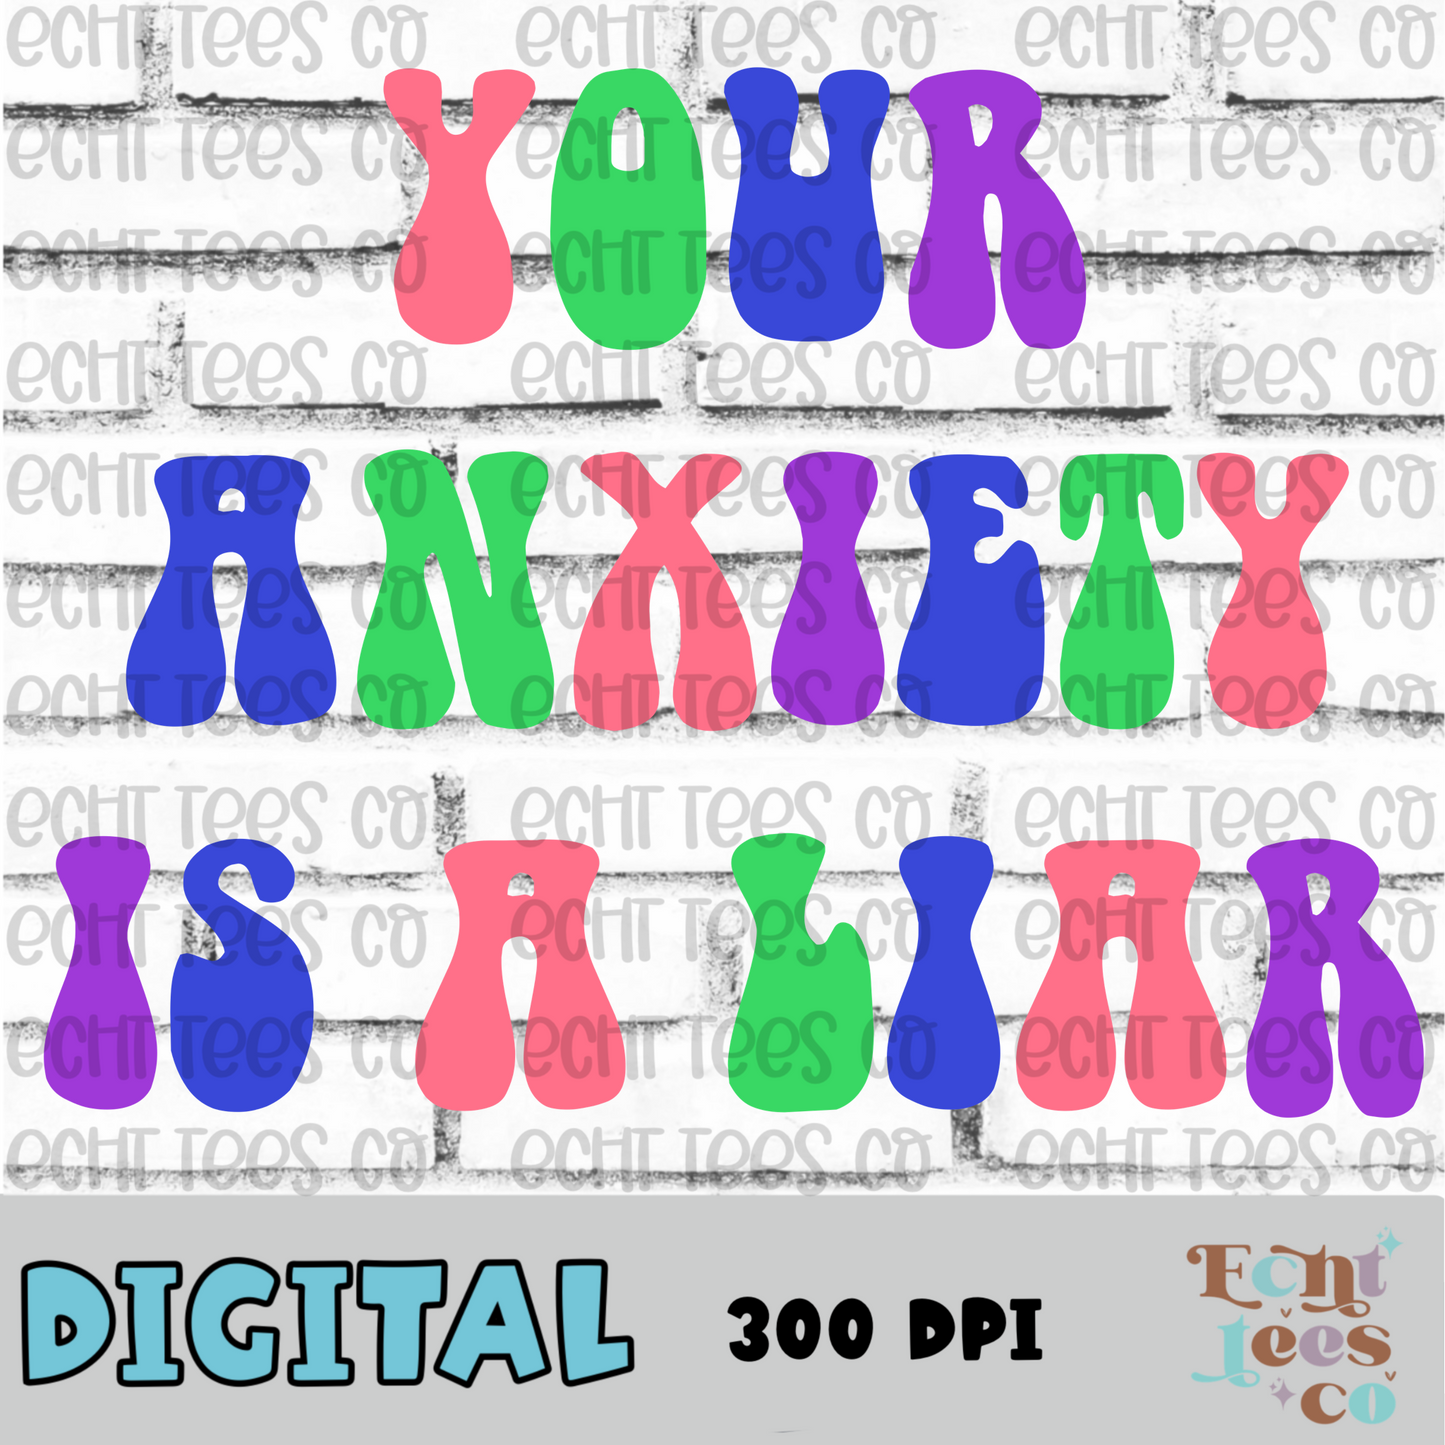 Your anxiety is a liar PNG Digital Download